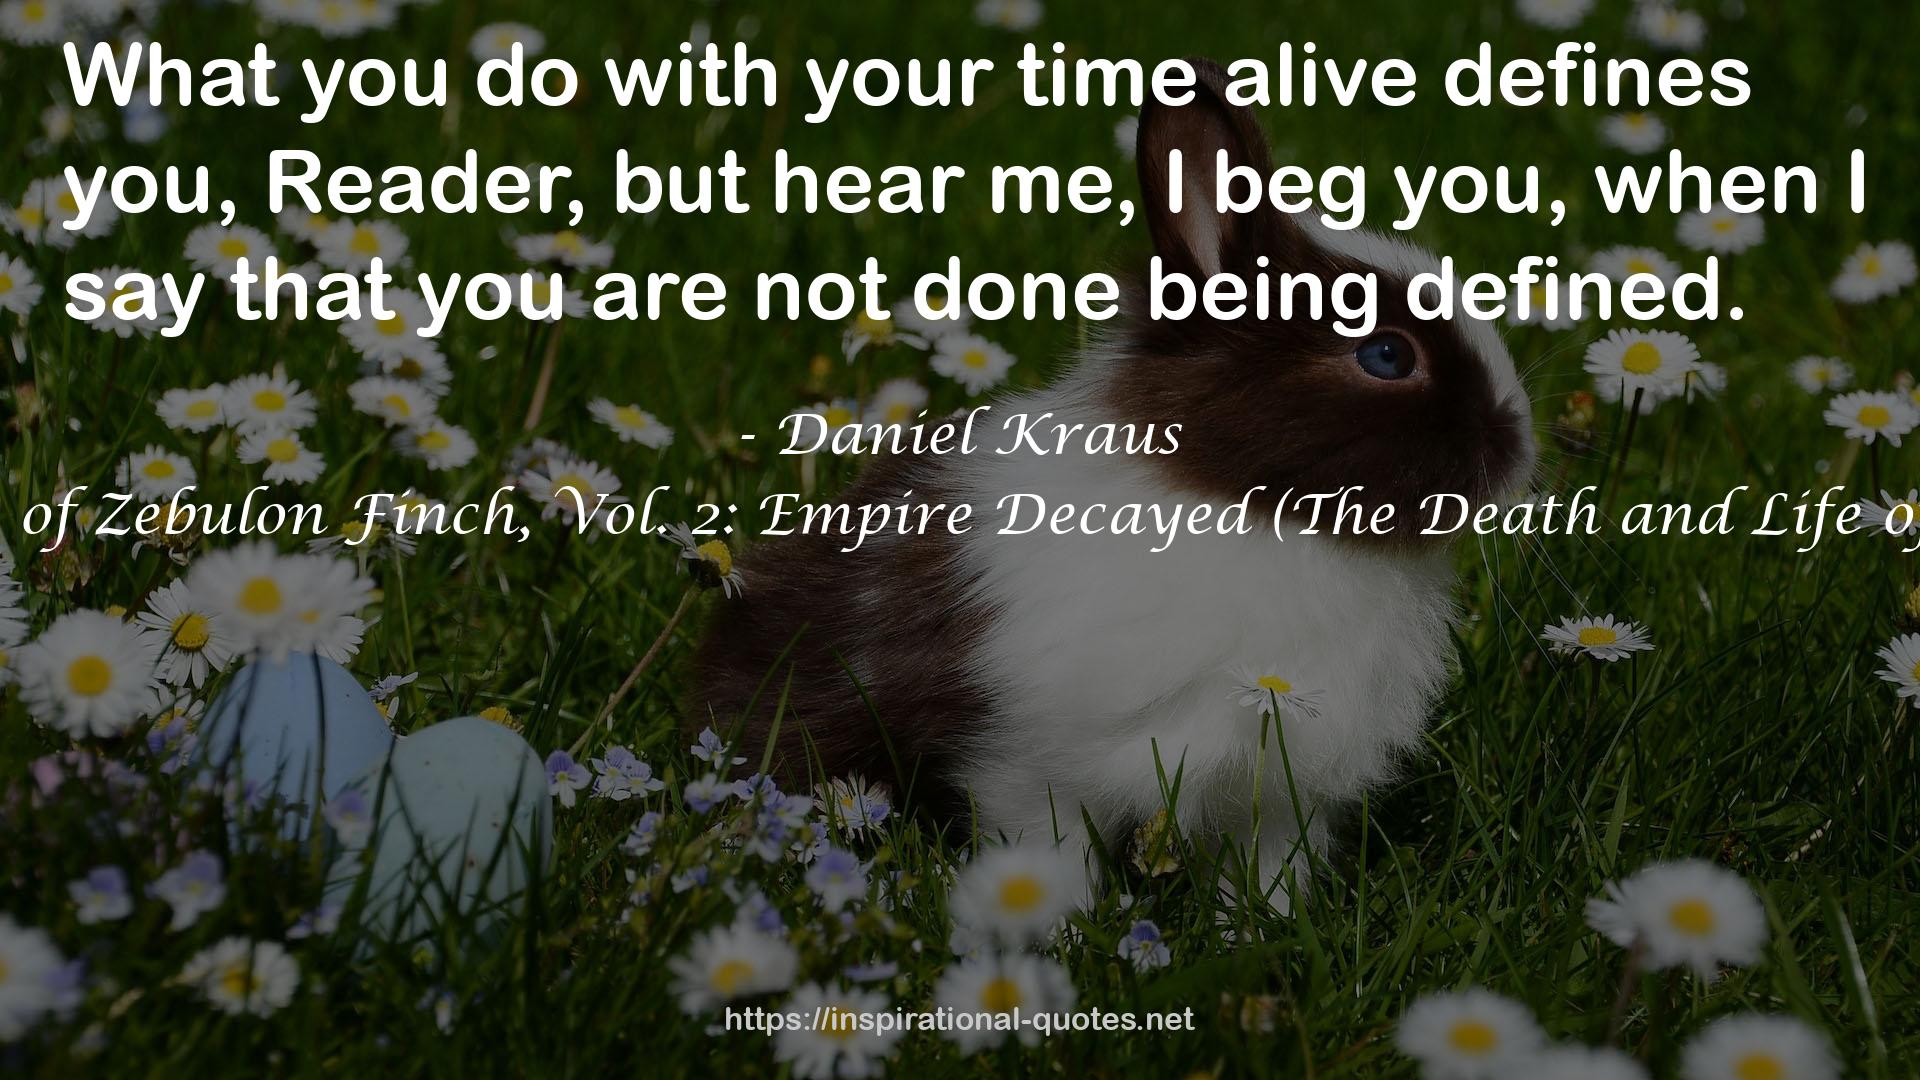 The Death and Life of Zebulon Finch, Vol. 2: Empire Decayed (The Death and Life of Zebulon Finch, #1) QUOTES